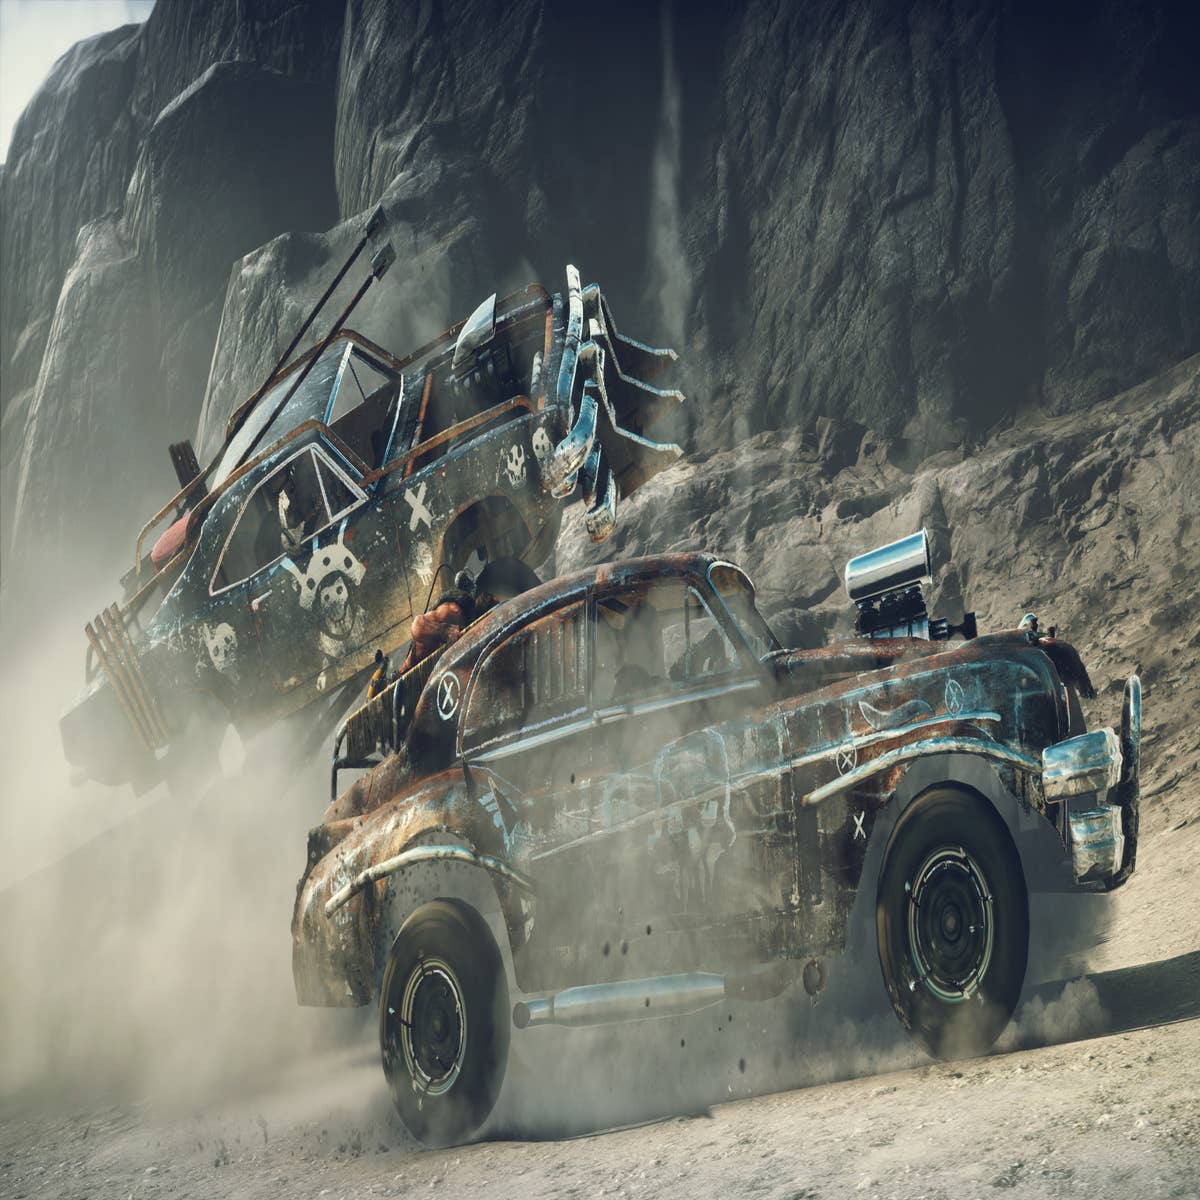 The Mad Max game takes a different path to Fury Road